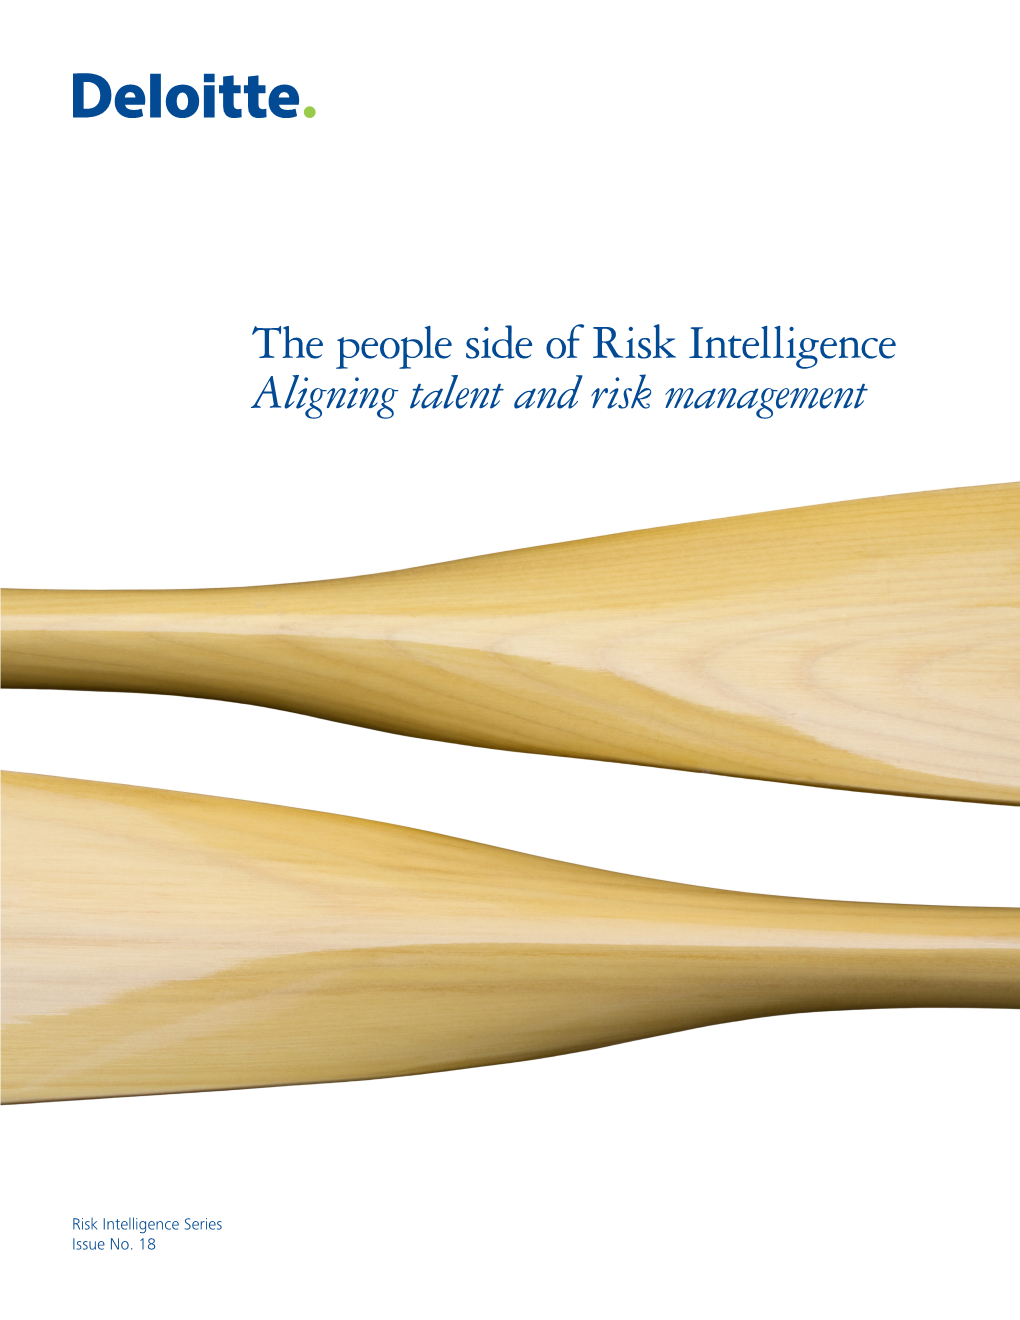 The People Side of Risk Intelligence Aligning Talent and Risk Management